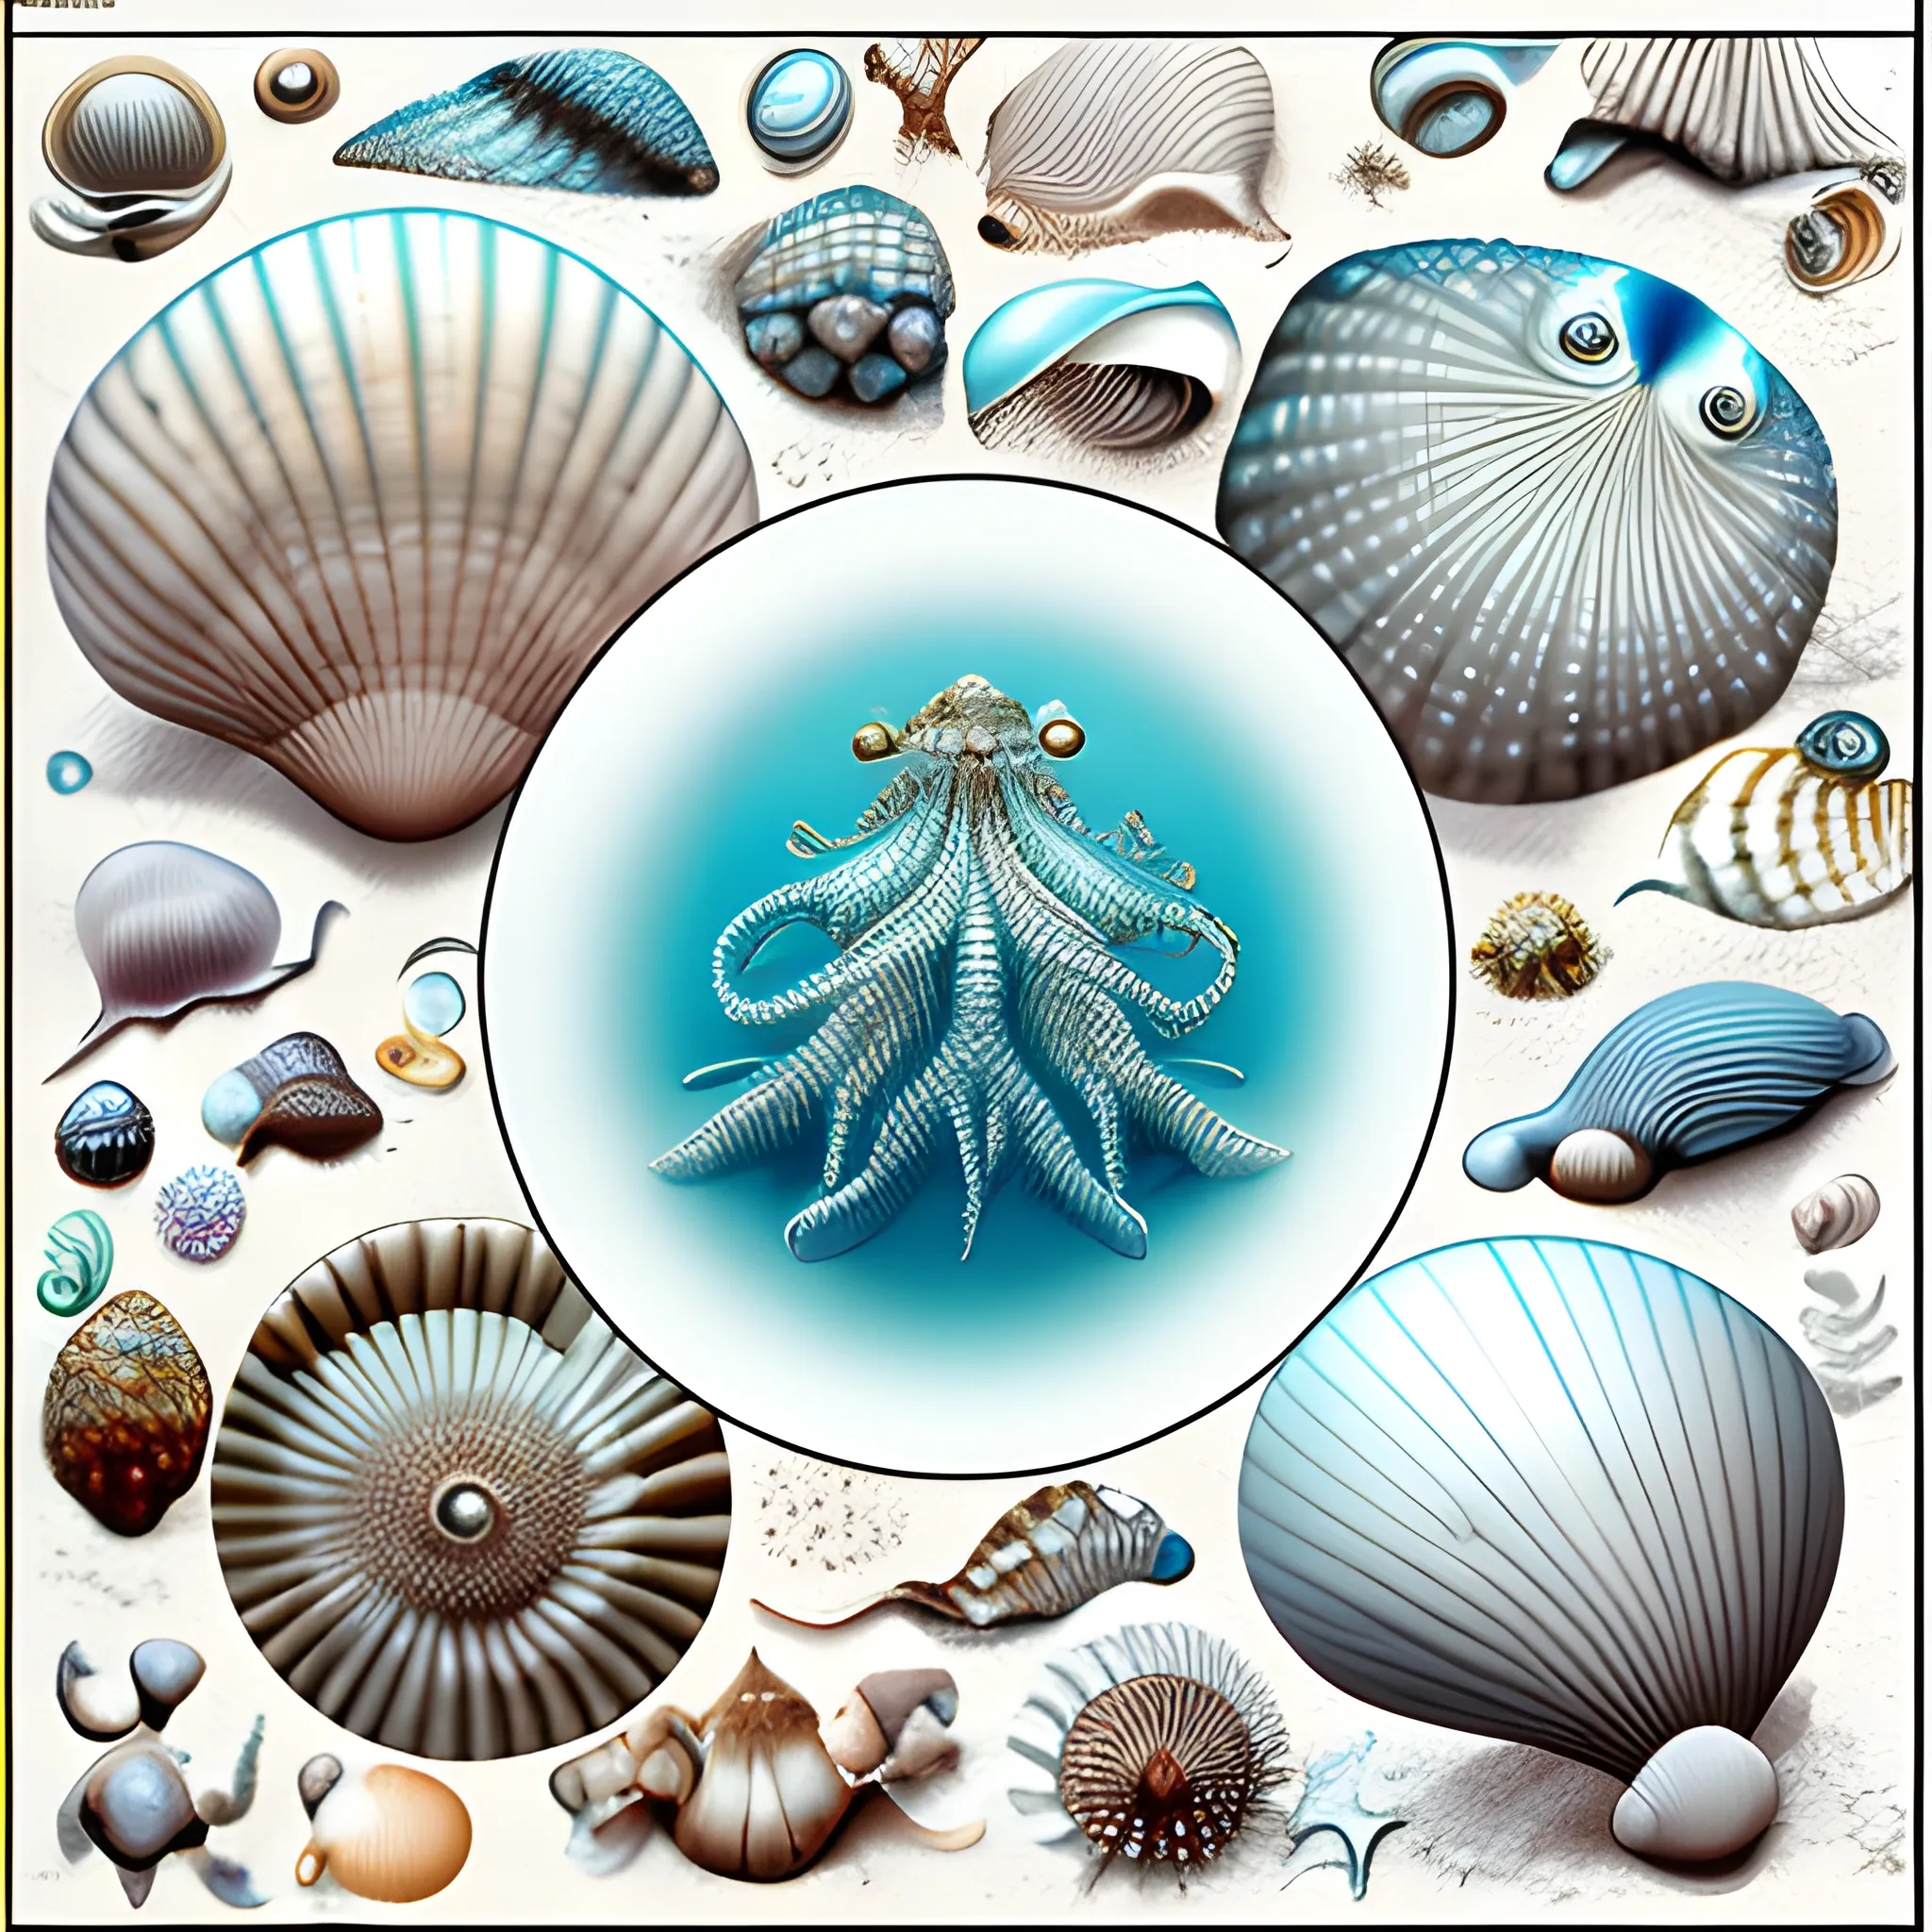 Sketch, close-up macro shots of unusual sea creatures among dazzling white sands and vivid shells on the seafloor using available light, in the style of scientific illustrations.